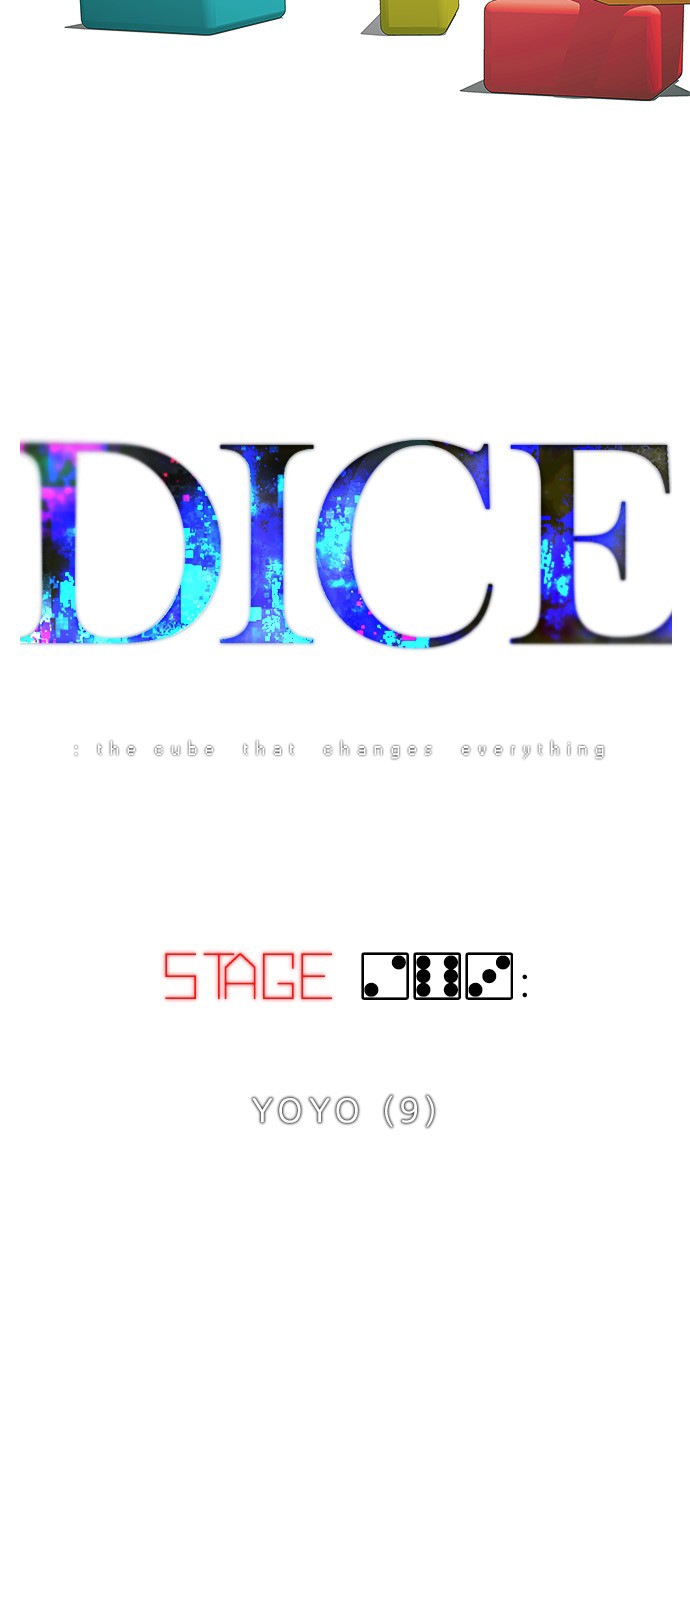 DICE: The Cube that Changes Everything Ch. 263 YOYO (9)